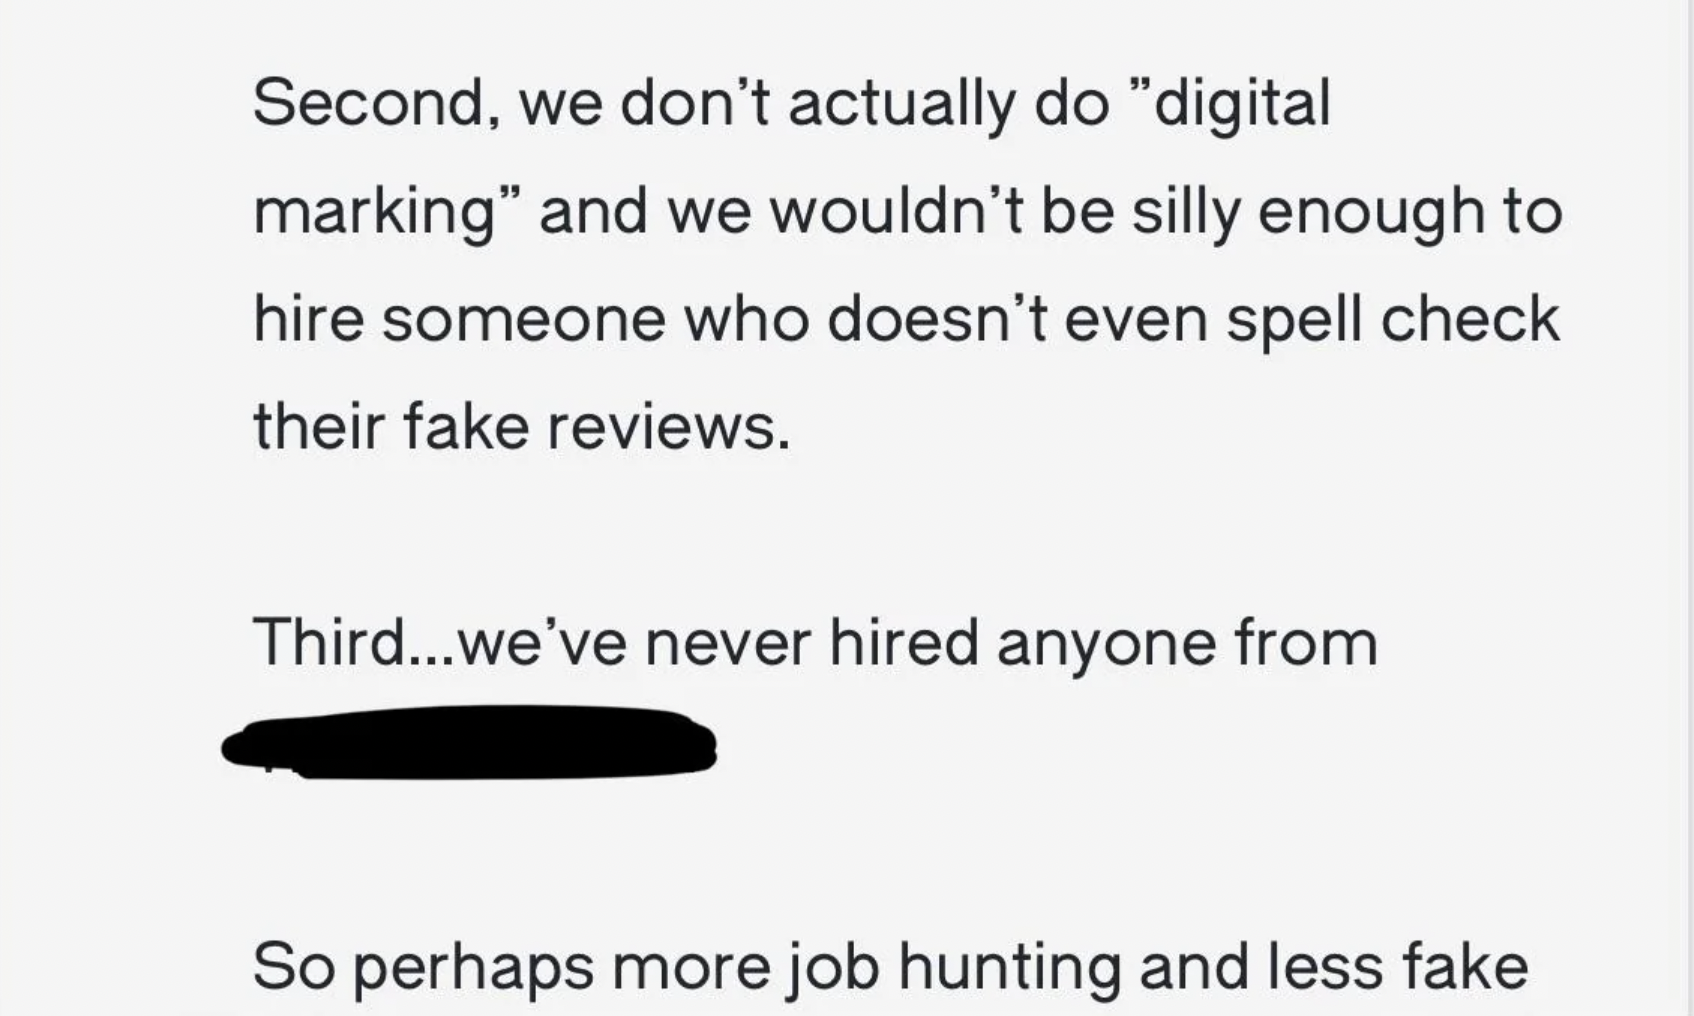 paper - Second, we don't actually do "digital marking" and we wouldn't be silly enough to hire someone who doesn't even spell check their fake reviews. Third...we've never hired anyone from So perhaps more job hunting and less fake